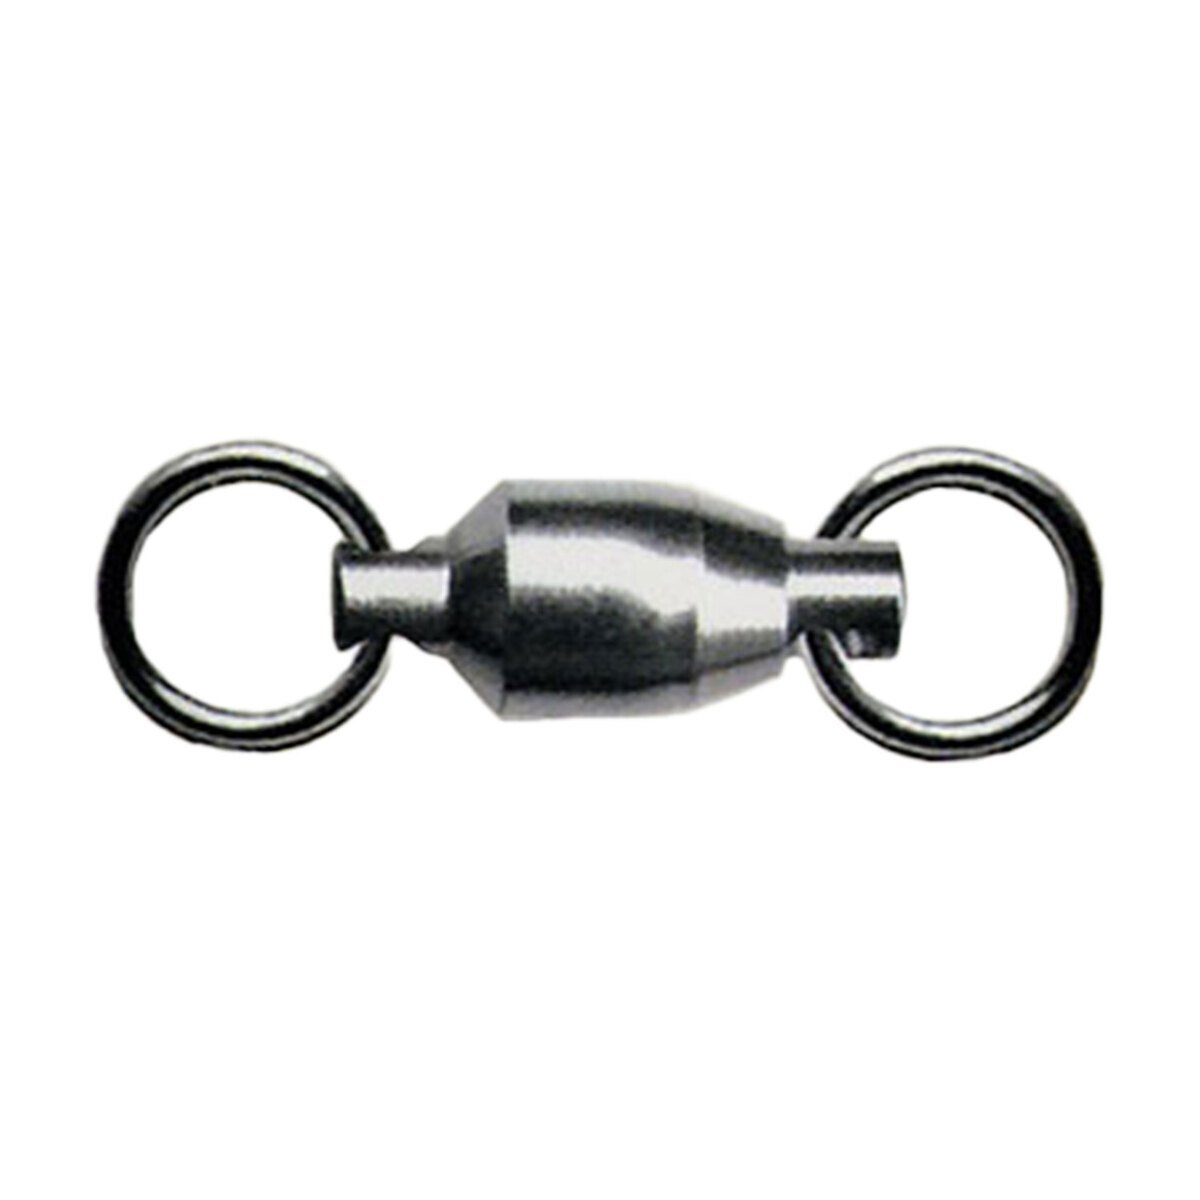 Barrel Swivels Snap Fishing Tackles Kit, Terminal Tackle Assorted Fishing  swivels with Snaps, Ball Bearing Swivels, 3 Way swivels, Fishing Snaps